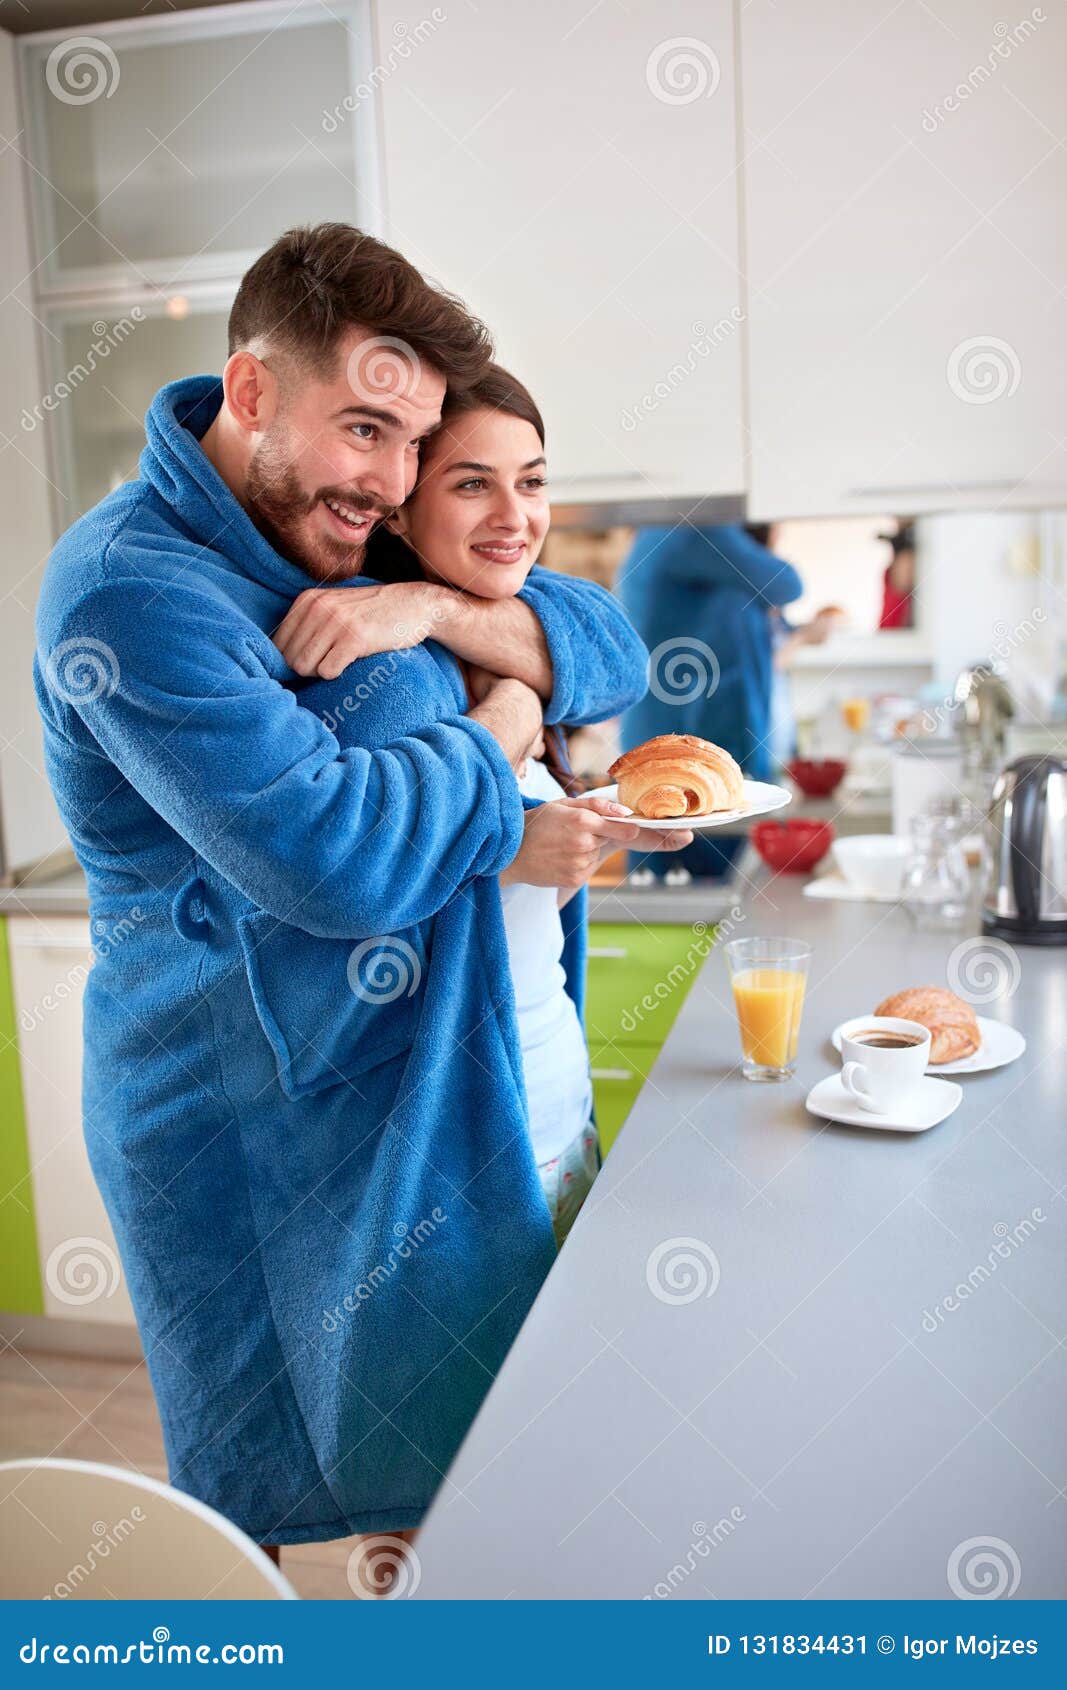 Couple Hugging in the Kitchen Stock Image - Image of attractive ...